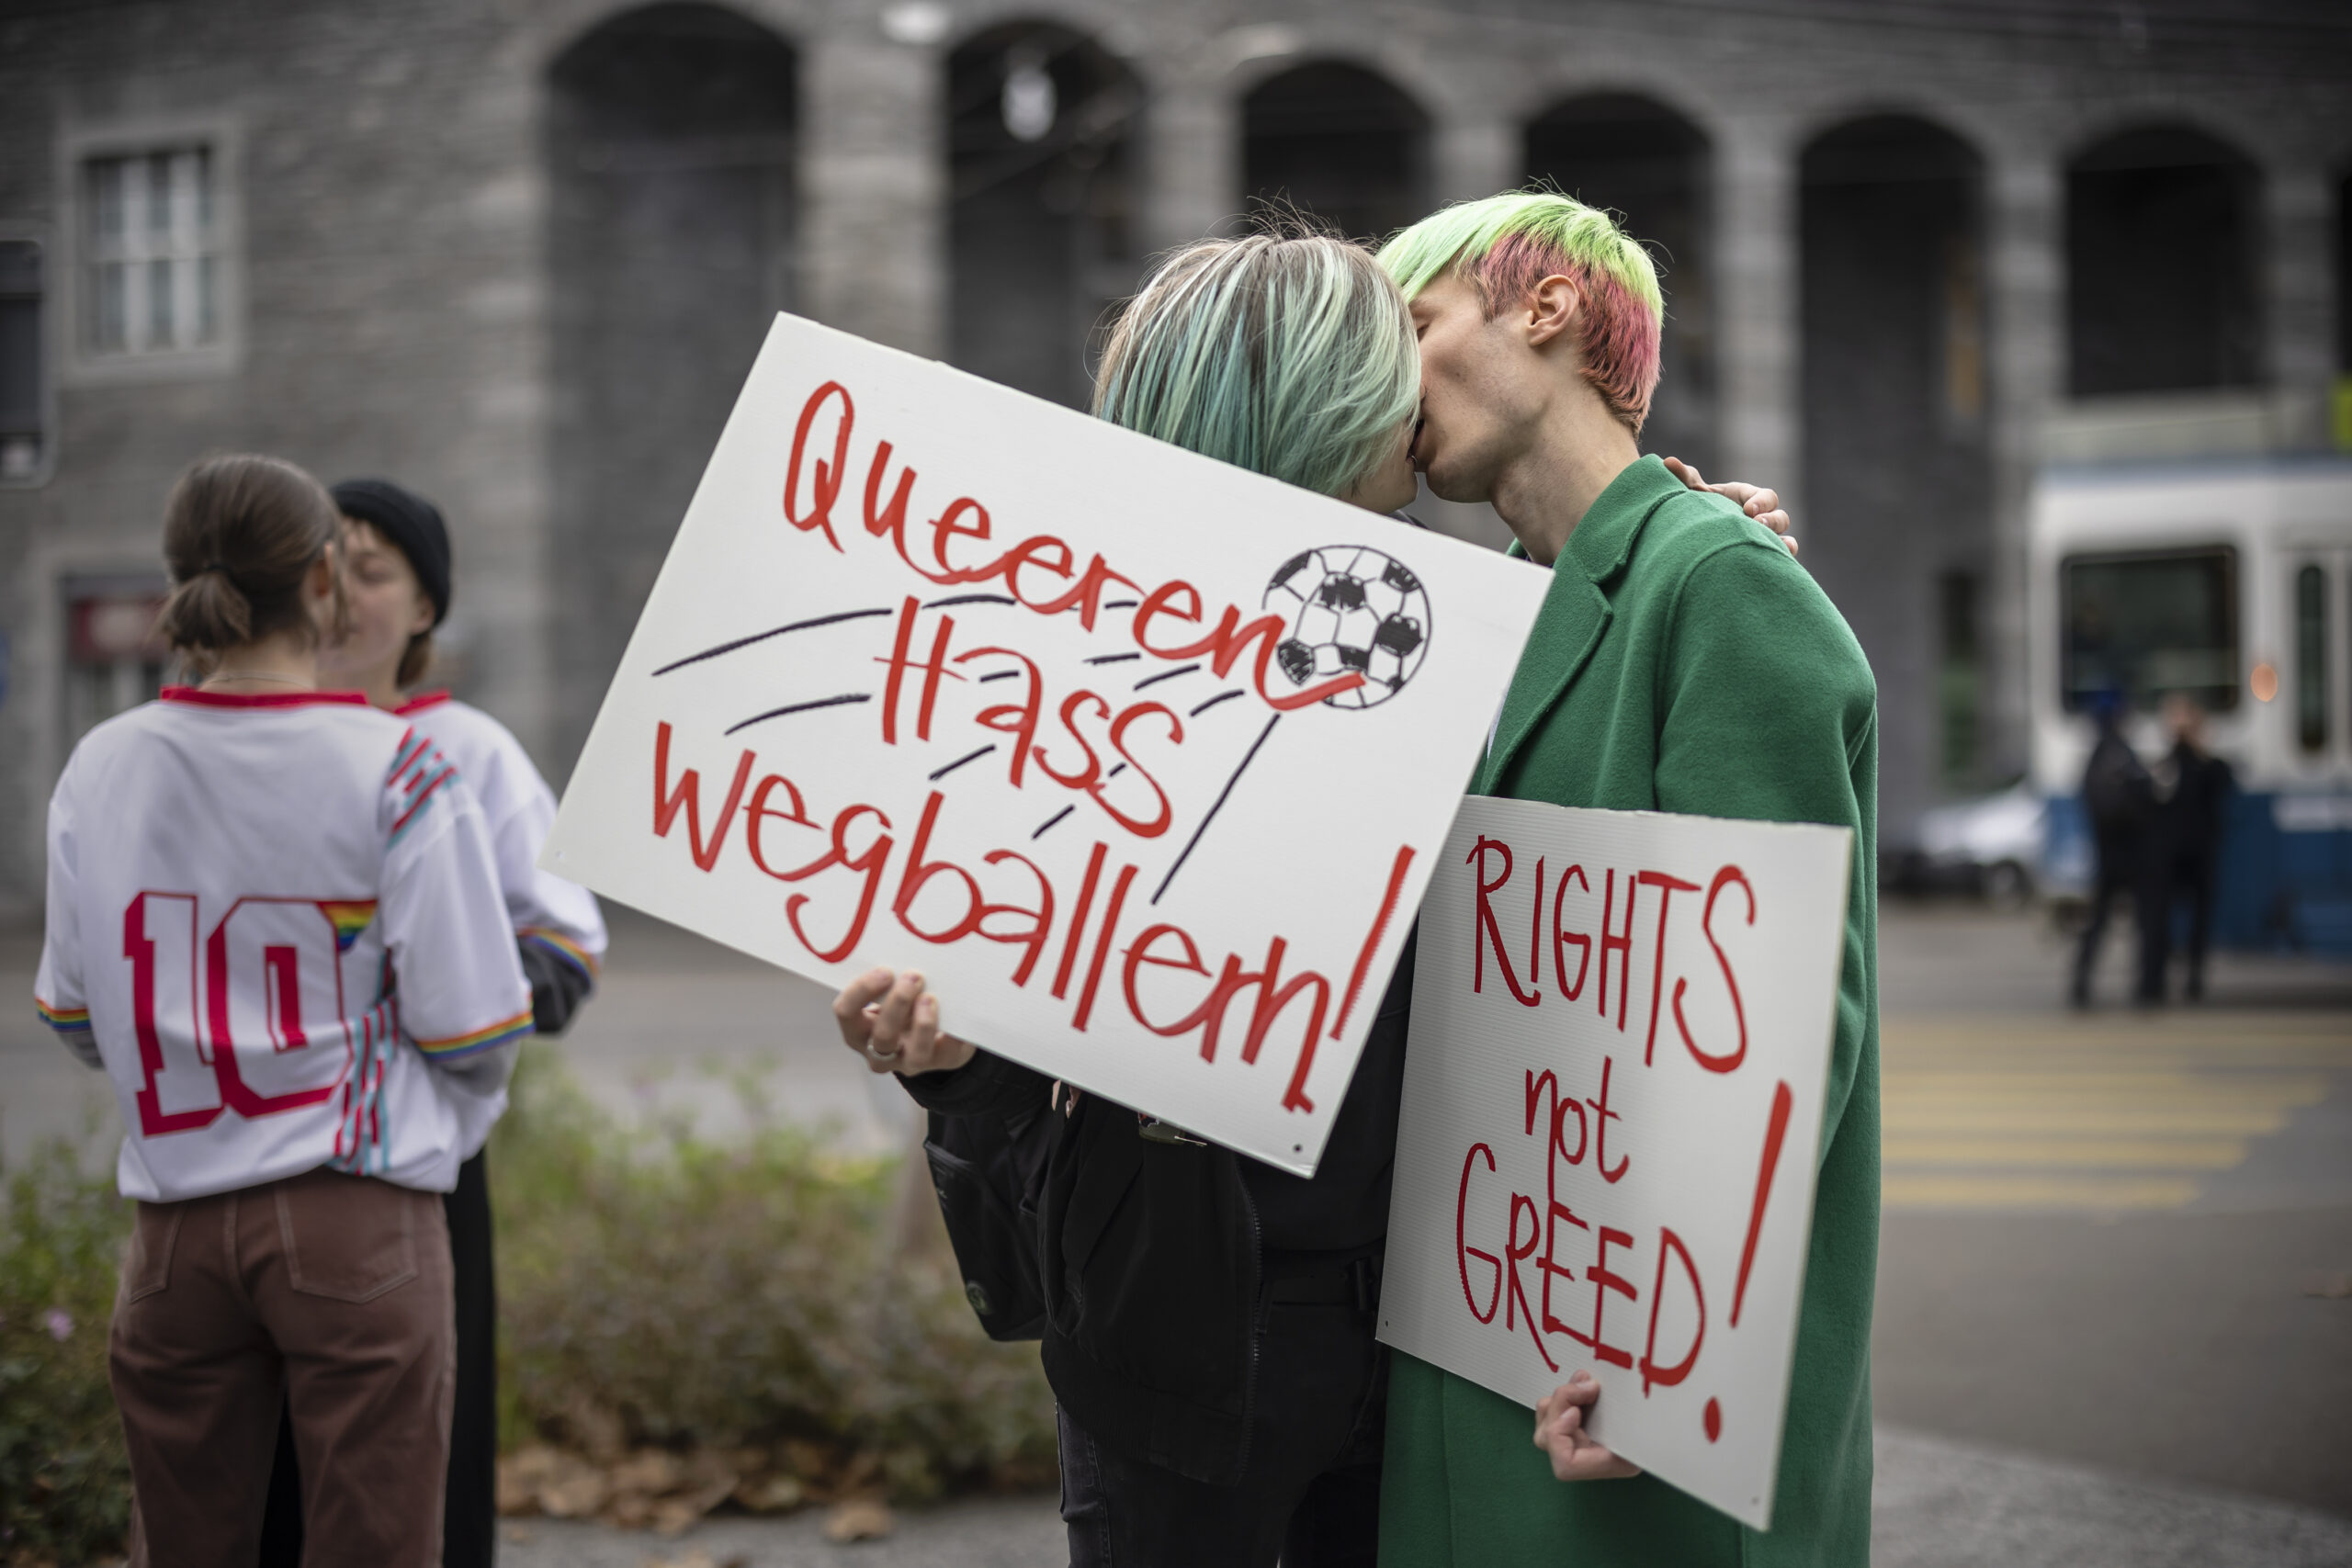 FILE - Protestors kiss while holding placards reading "Shoot out queer hate" and "Rights not greed" during a rally to raise awareness of the human rights situation of LGBTQ people in Qatar and FIFA's responsibility, in front of the FIFA Museum in Zurich, Switzerland, Tuesday, Nov. 8, 2022. An ambassador for the World Cup in Qatar has described homosexuality as a "damage in the mind" in an interview with German public broadcaster ZDF only two weeks before the opening of the soccer tournament in the Gulf state. (Michael Buholzer/Keystone via AP, File)